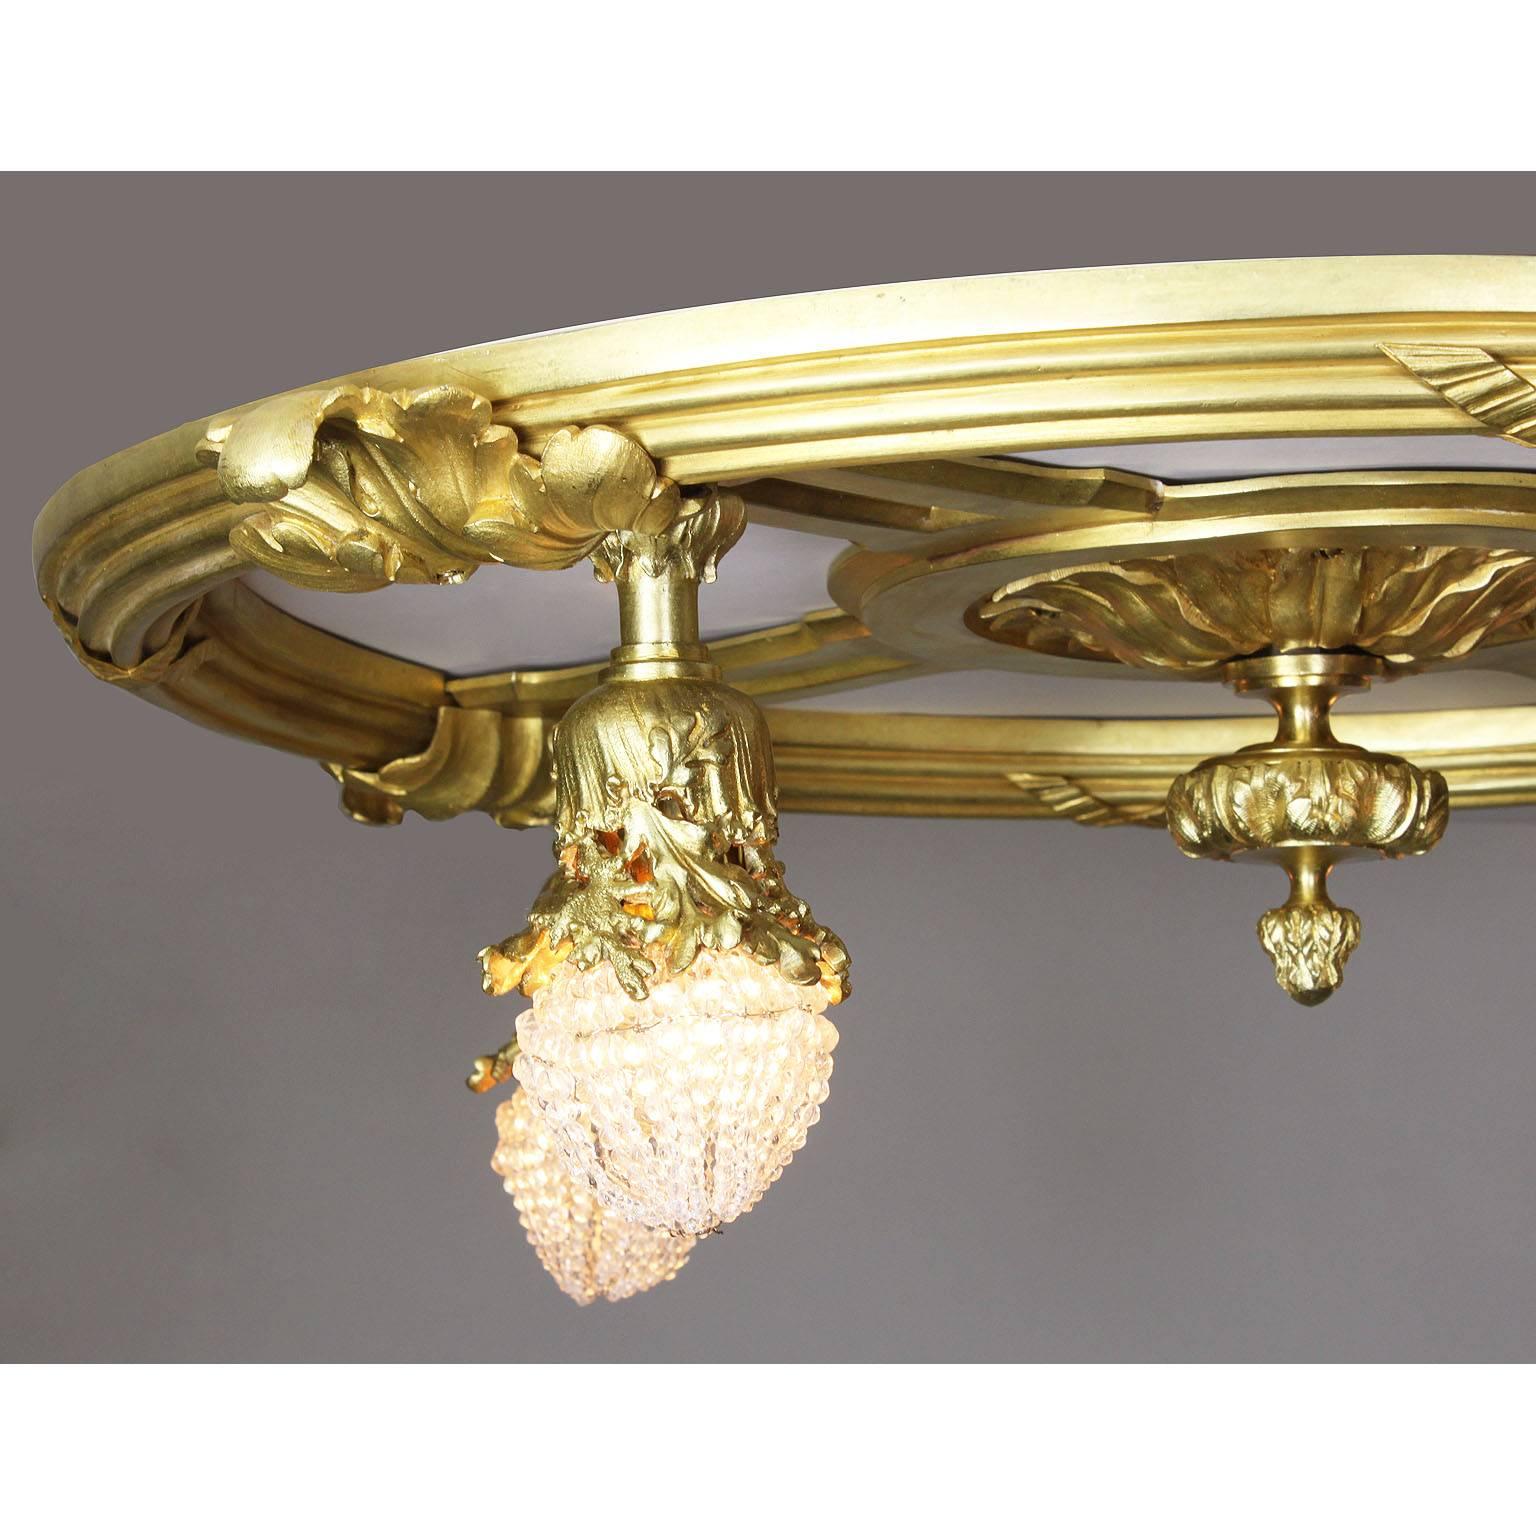 Early 20th Century French 19th-20th Century Belle Époque Gilt Bronze Plafonnier Ceiling Chandelier